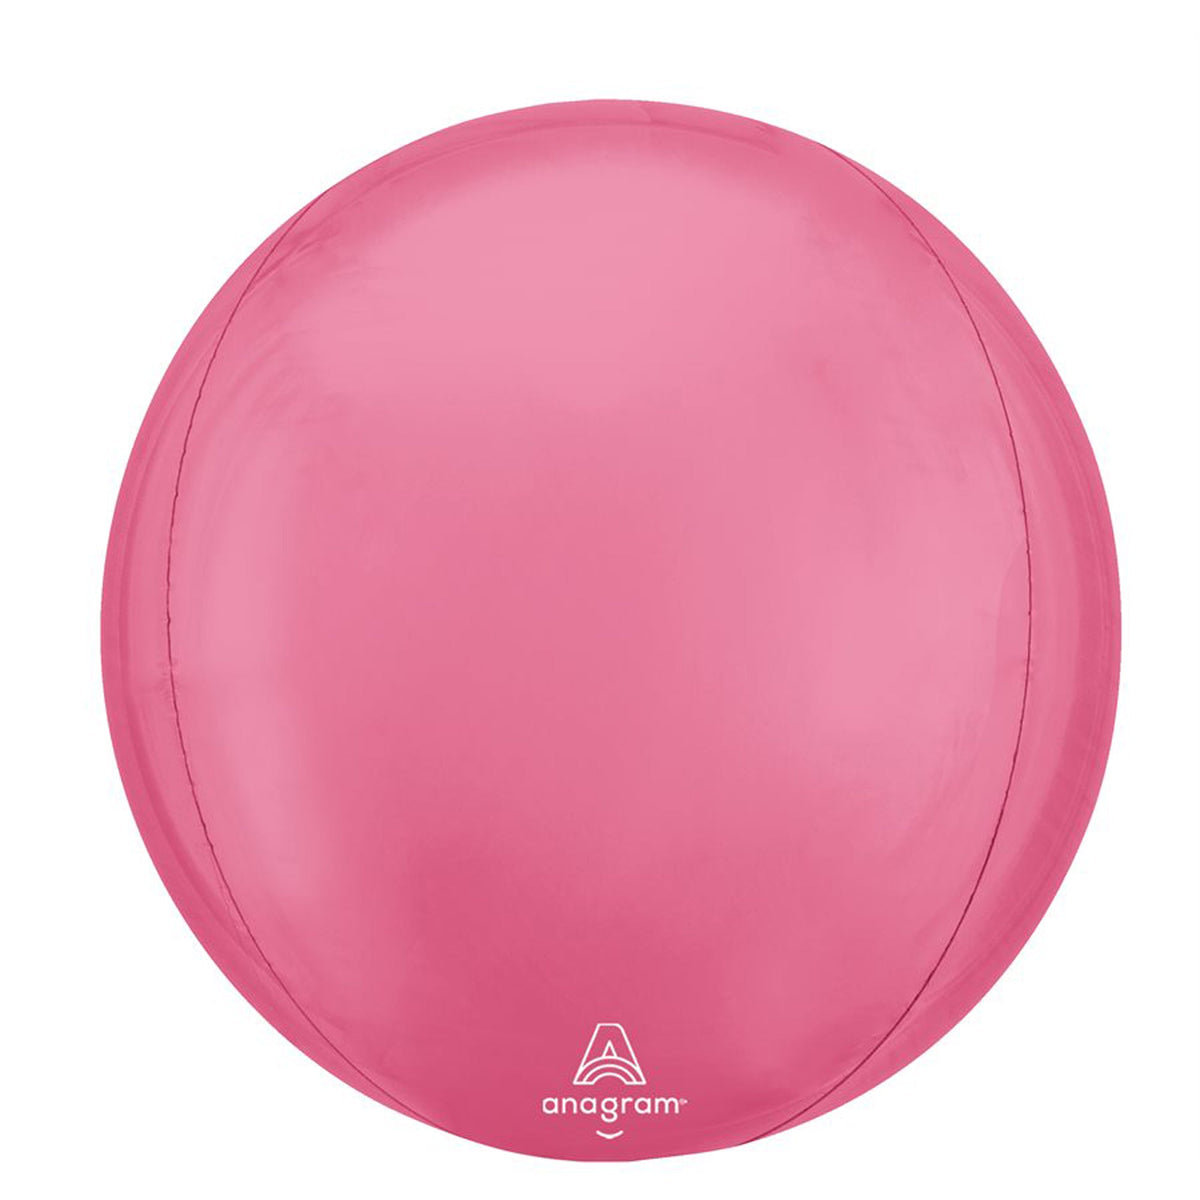 LE GROUPE BLC INTL INC Balloons Vibrant Pink Orbz Balloon, 15 Inches, 1 Count 026635470810